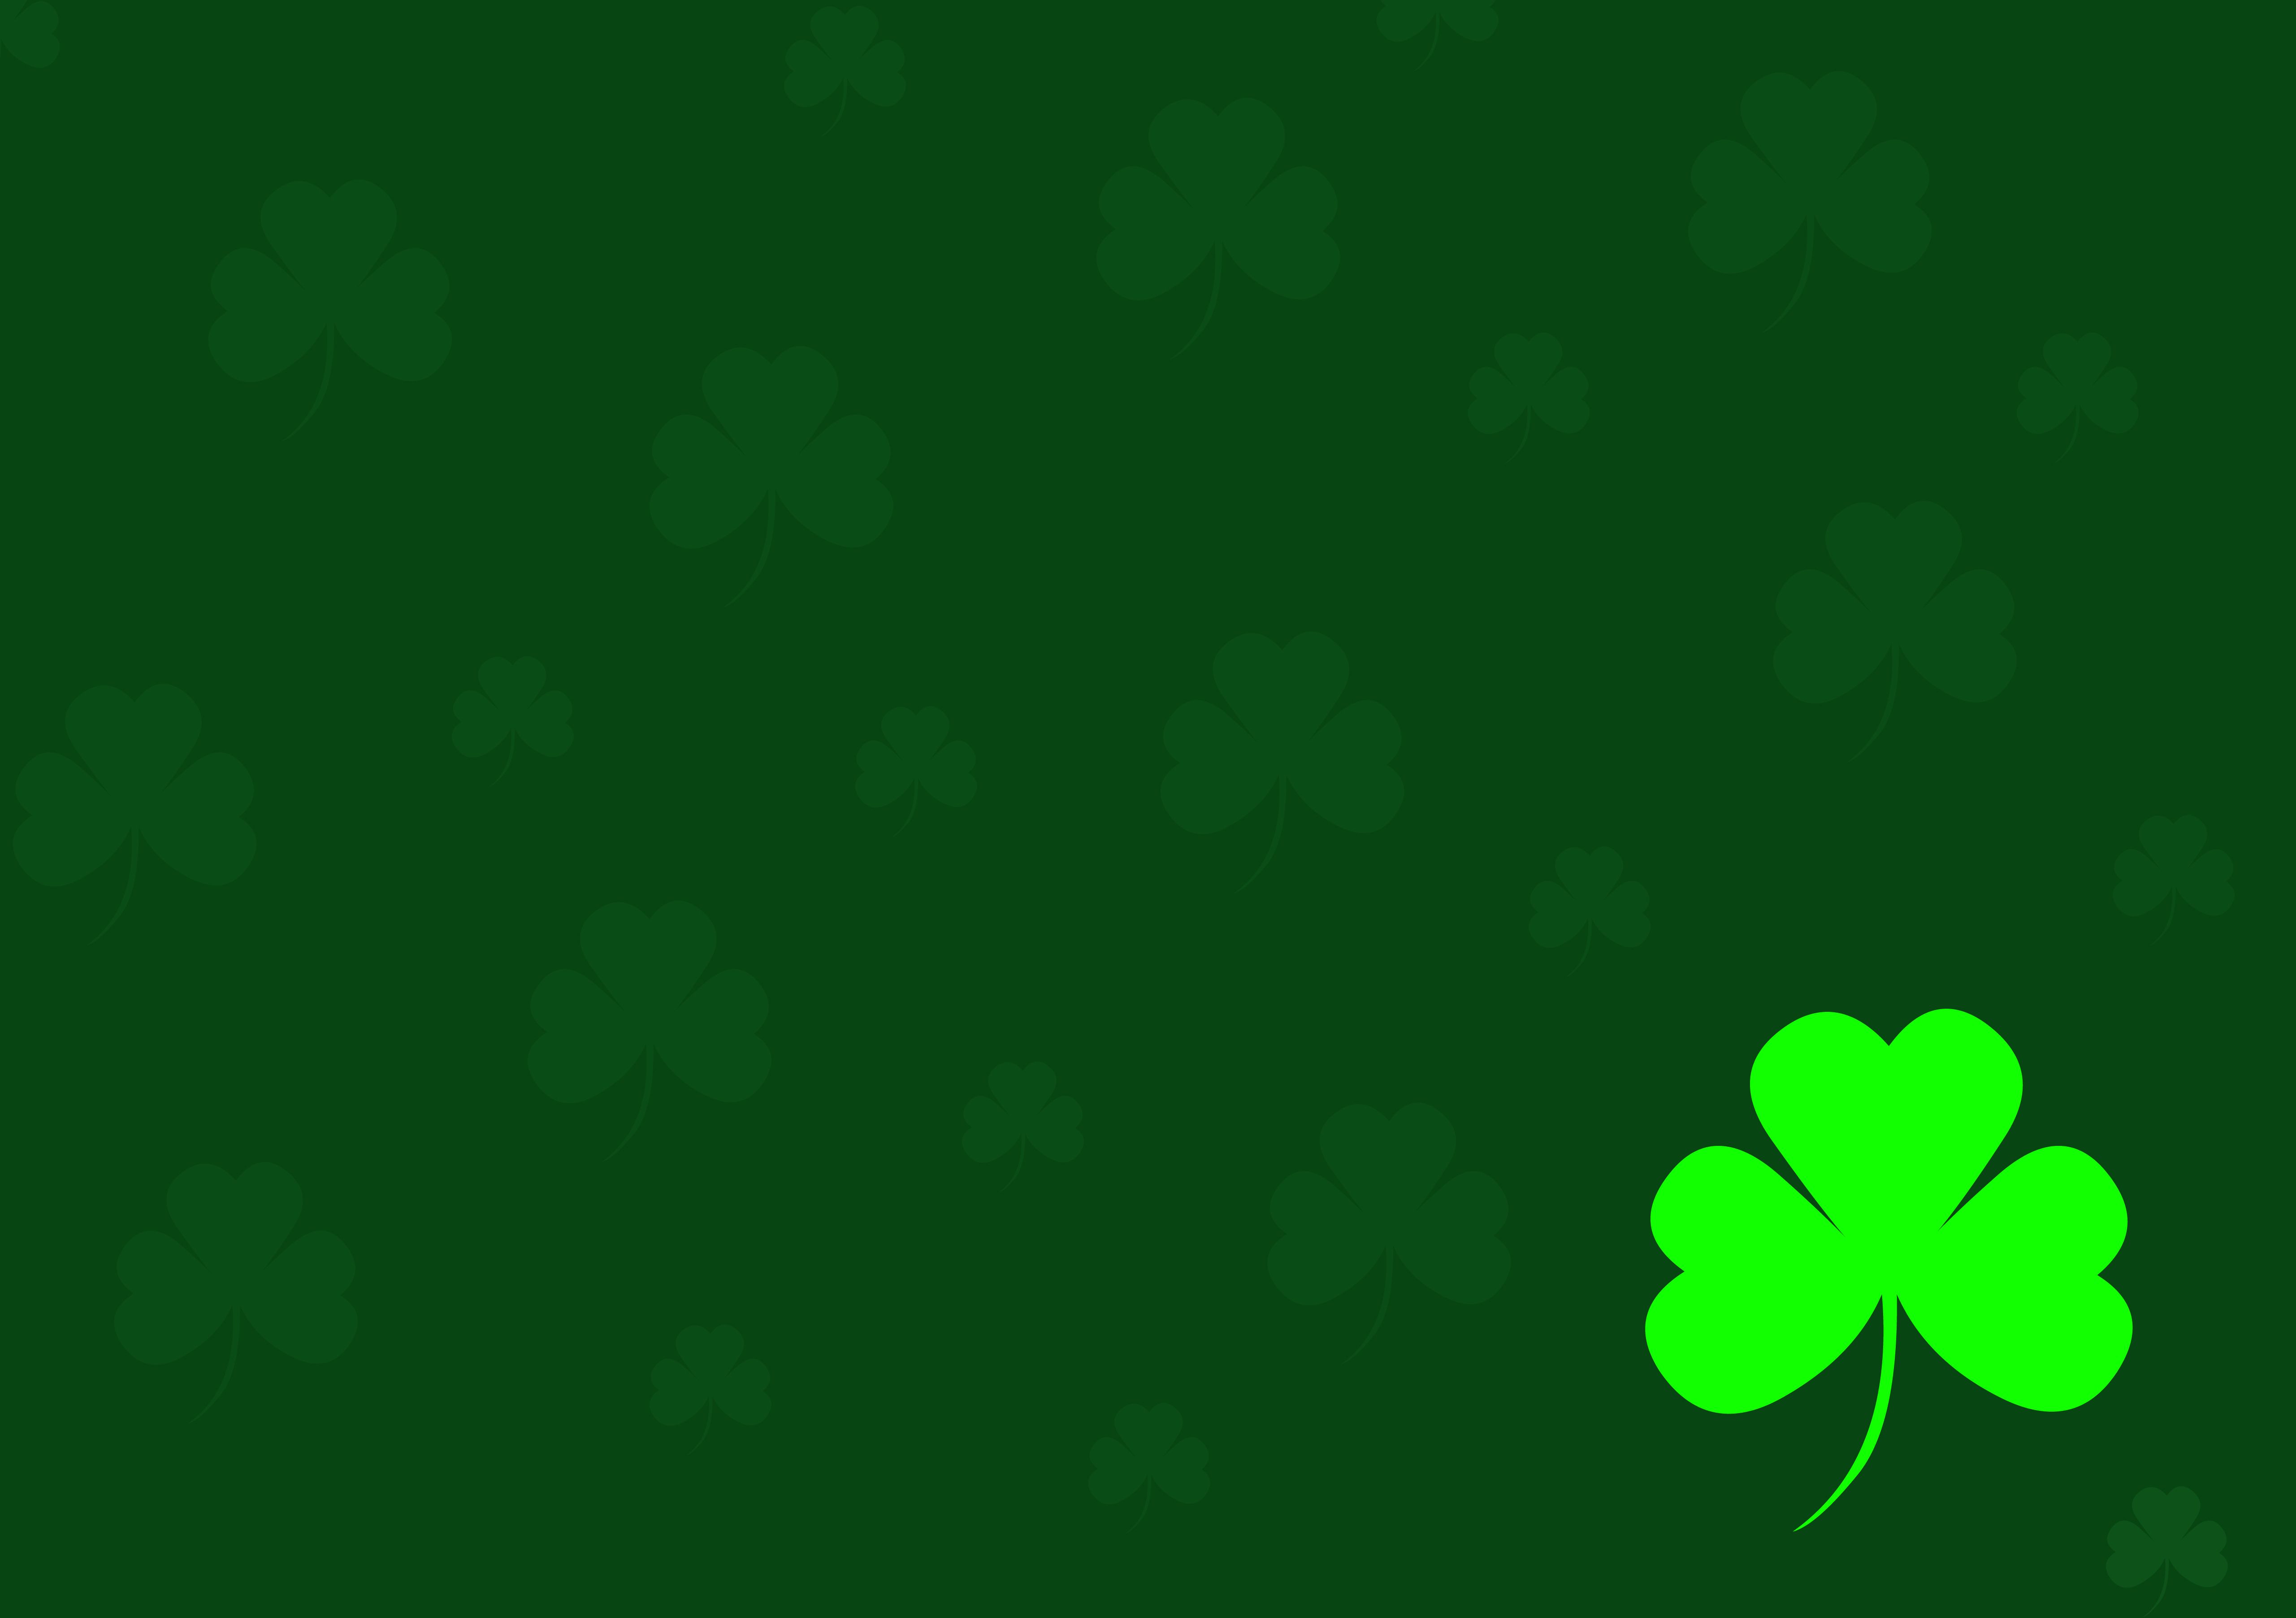 St. Patricks Day Free Images | Free St. Patricks Day Backgrounds ...